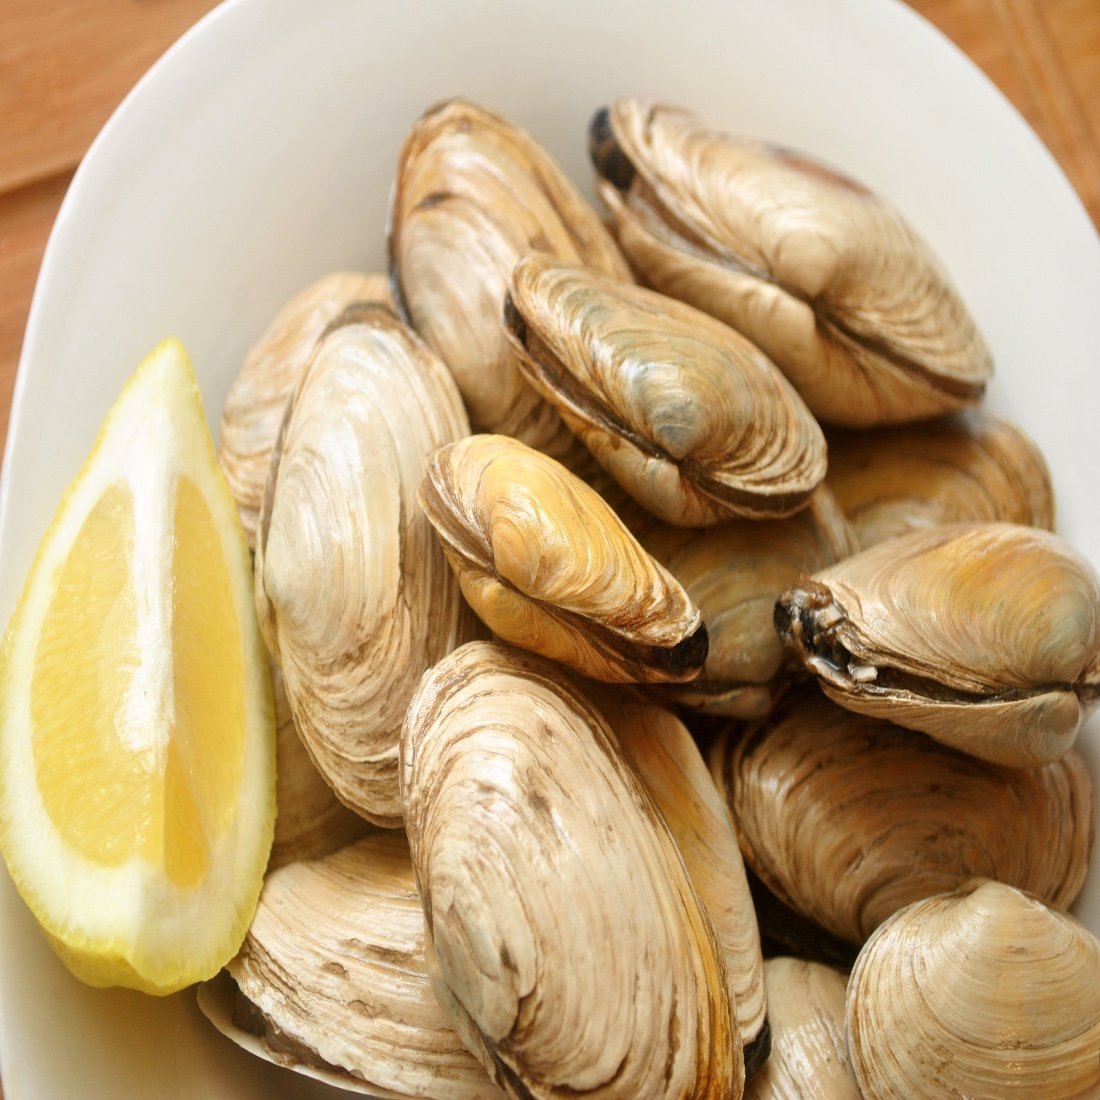 GUIDE TO HANDLING MAINE STEAMER CLAMS